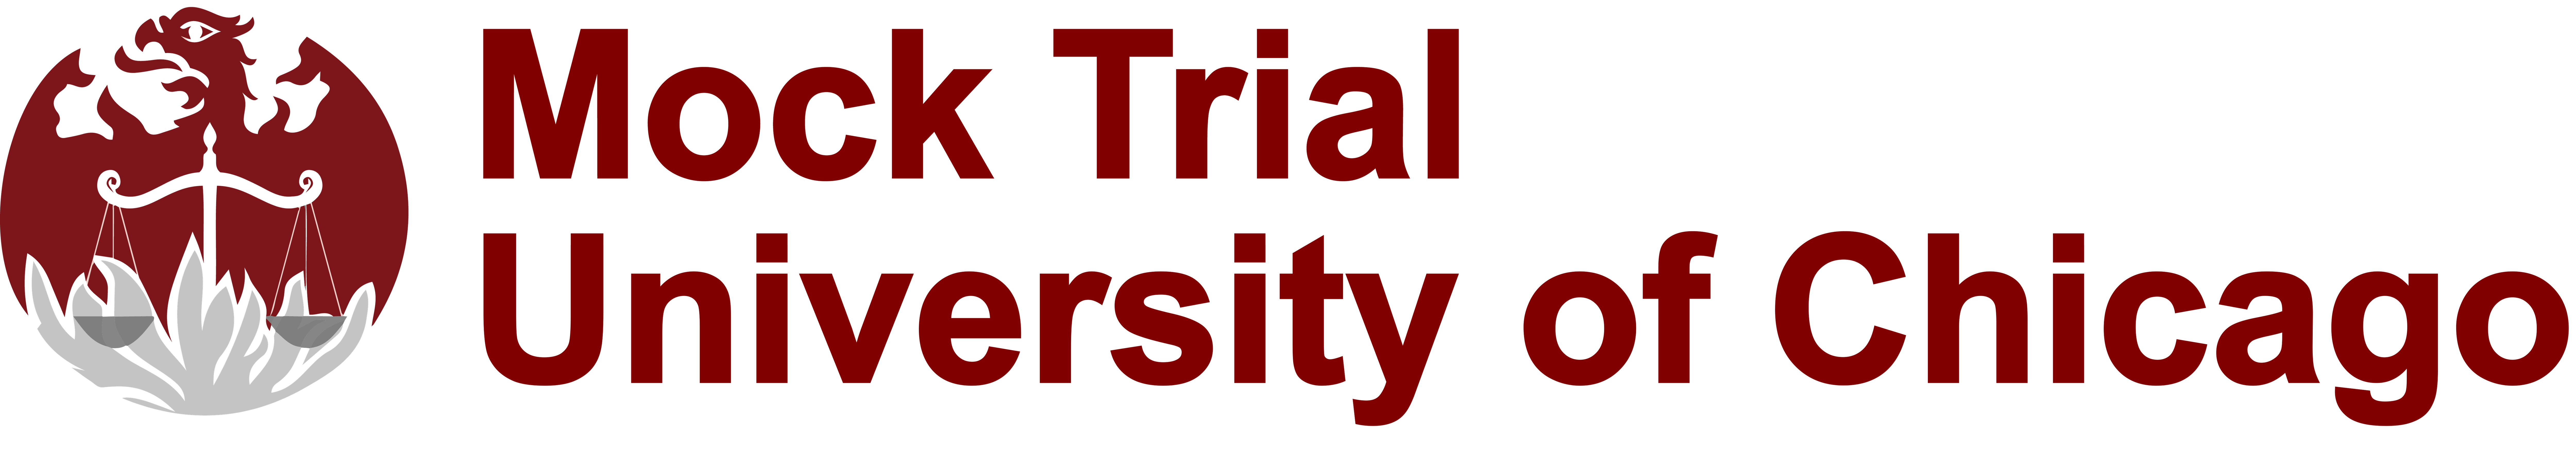 University of Chicago Mock Trial